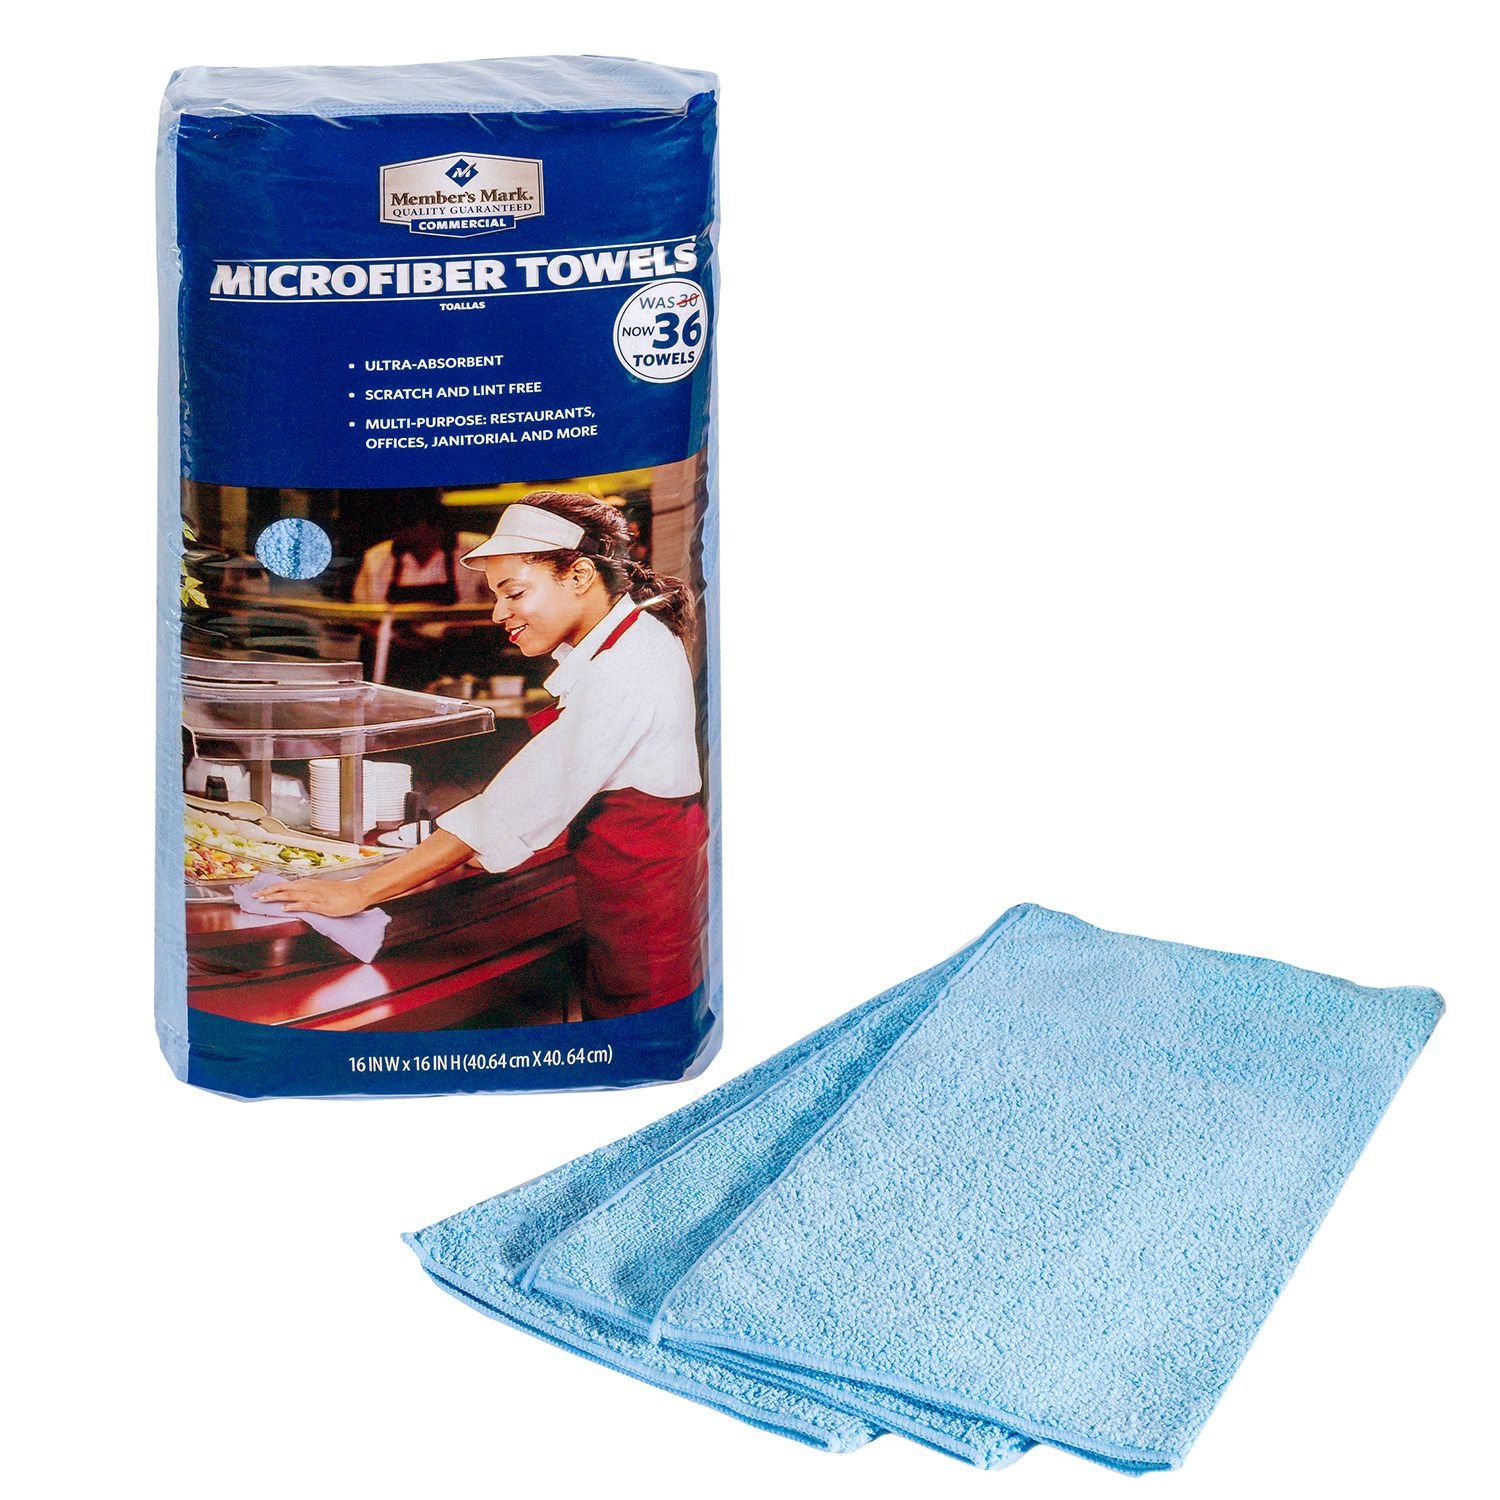 COTTON HUCK TOWELS - YEAGER'S DETAILING SUPPLIESYeager's Auto Dealer and  Detailing Supplies